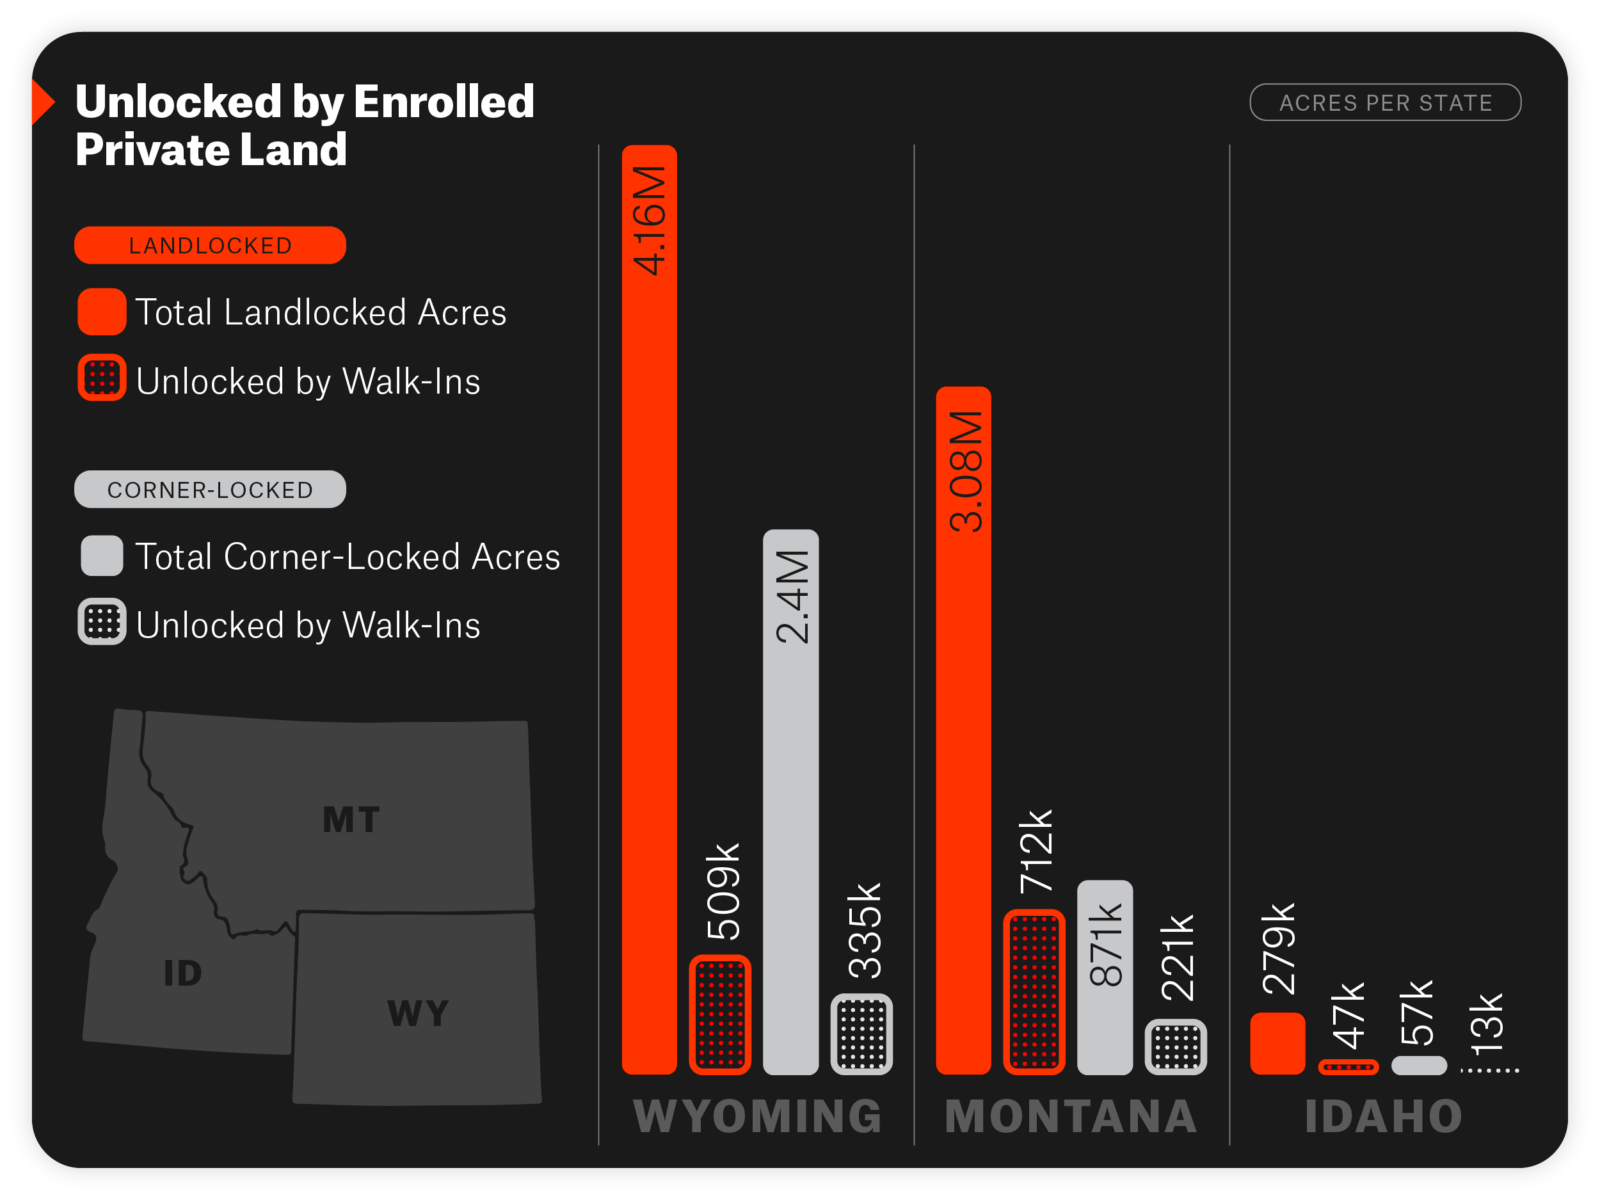 A line graph showing the acres per state that are unlocked by enrolled private land with landlocked acres and corner-locked acres. 